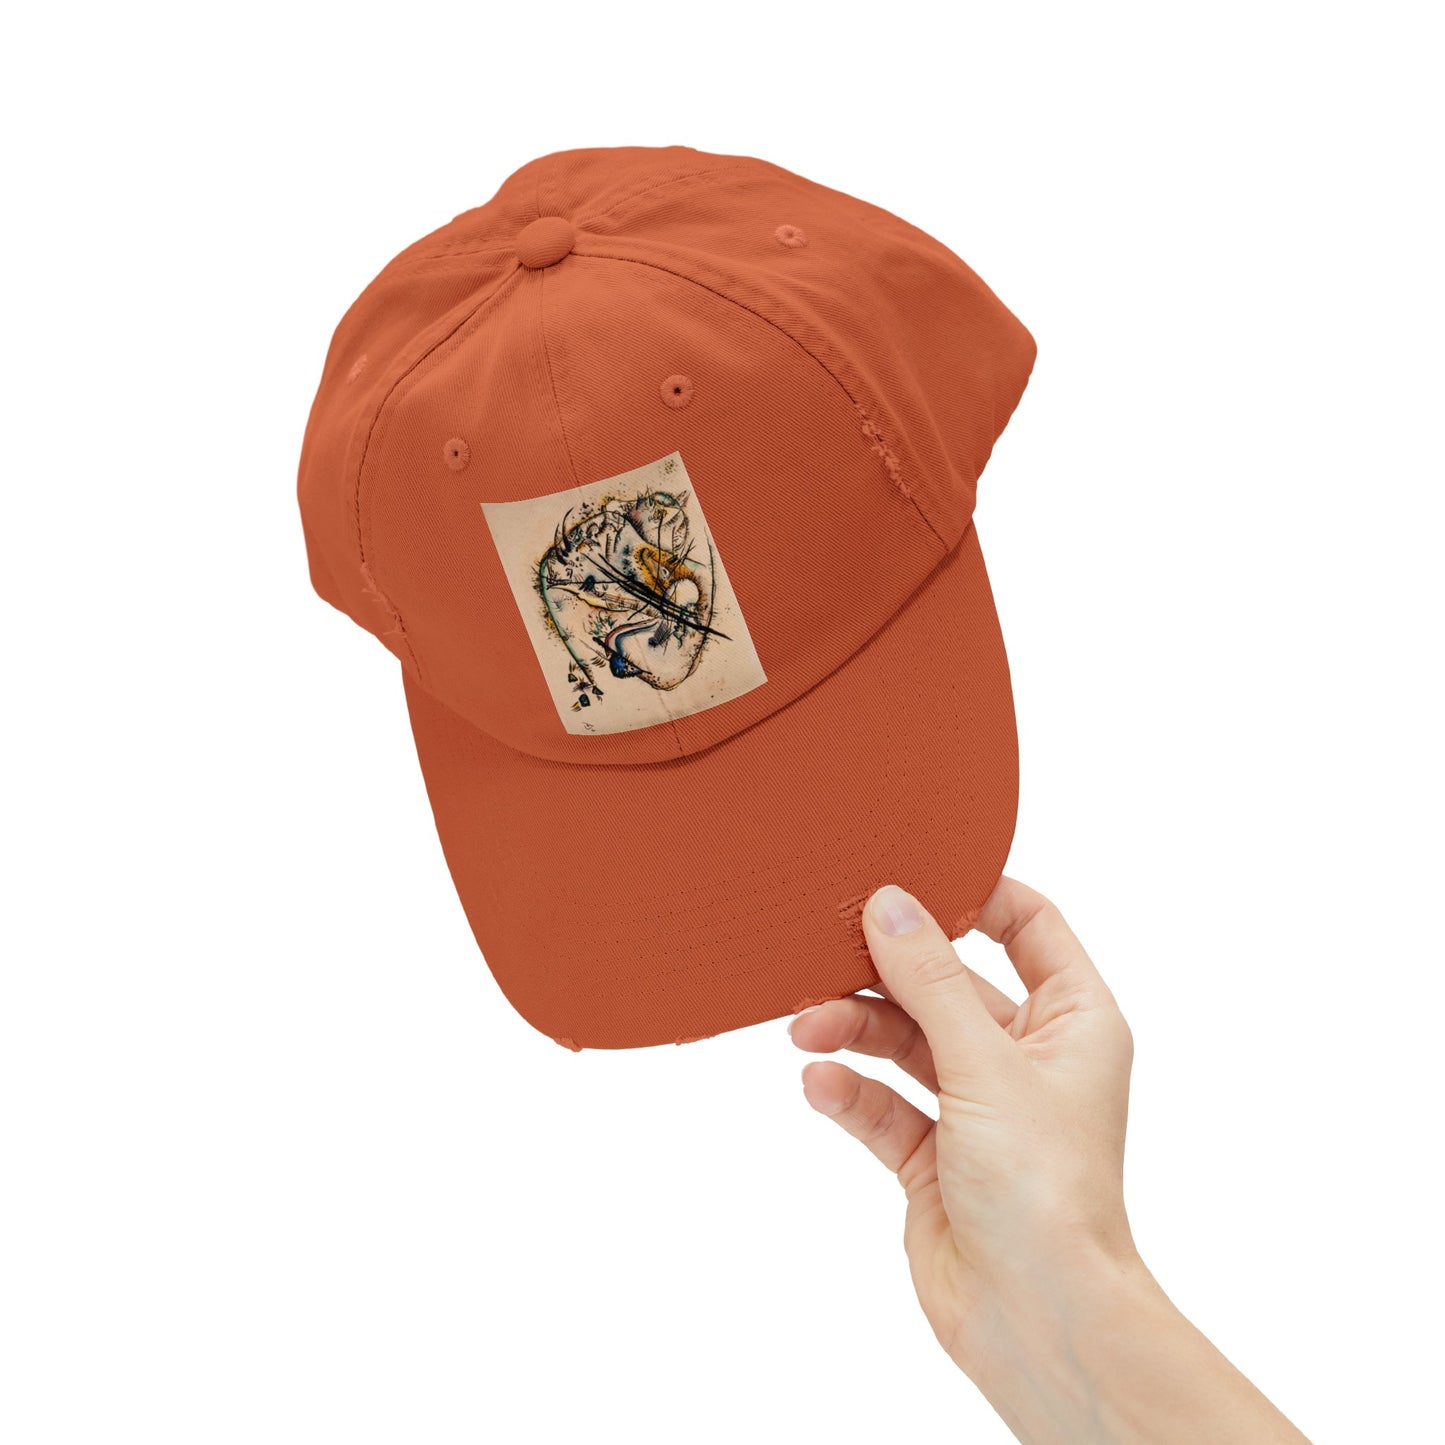 a person holding a baseball cap with a sticker on it